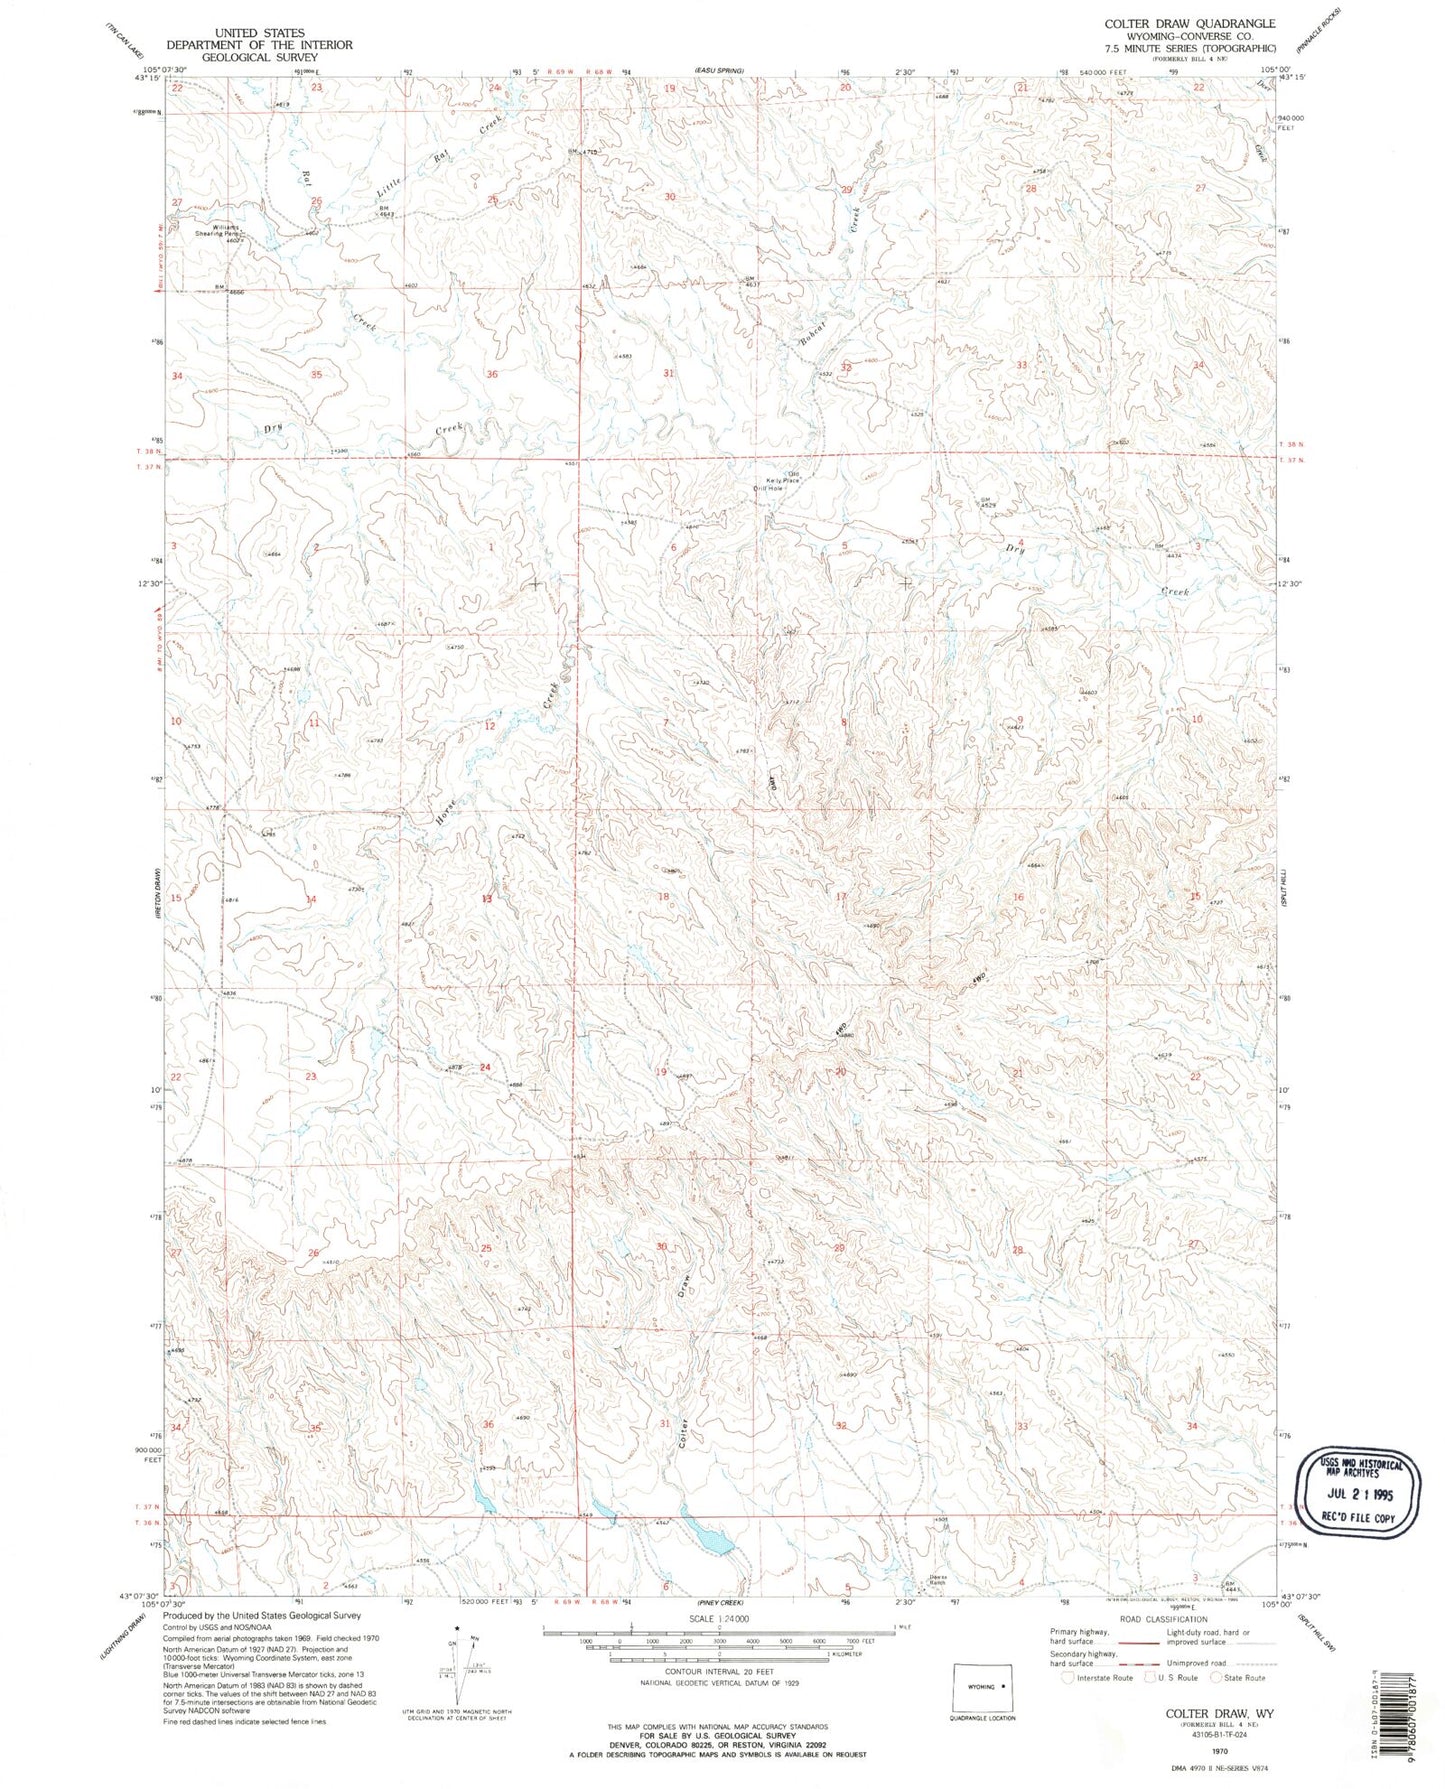 Classic USGS Colter Draw Wyoming 7.5'x7.5' Topo Map Image